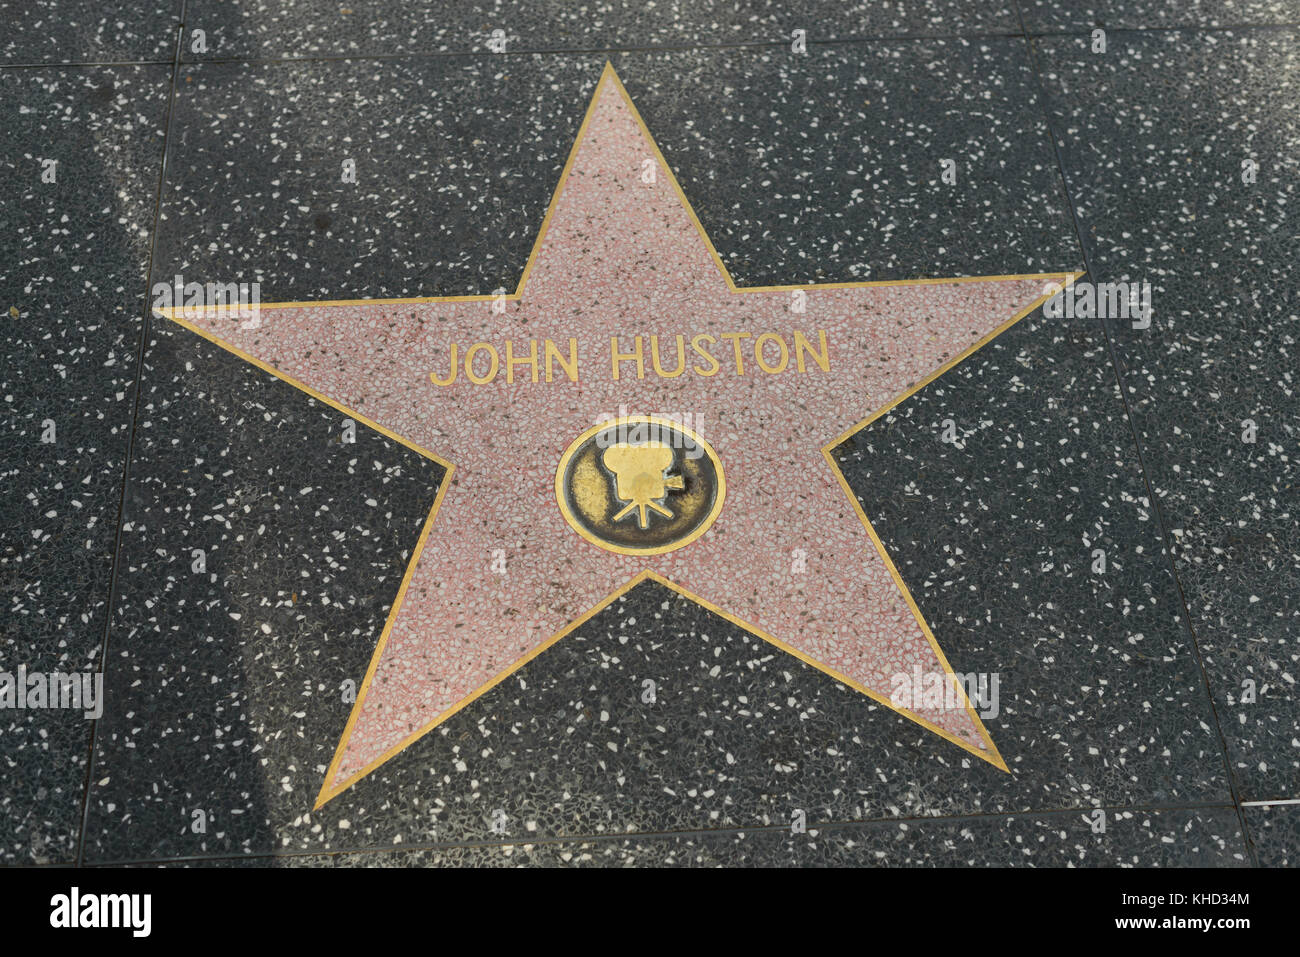 HOLLYWOOD, CA - DECEMBER 06: John Huston star on the Hollywood Walk of Fame in Hollywood, California on Dec. 6, 2016. Stock Photo